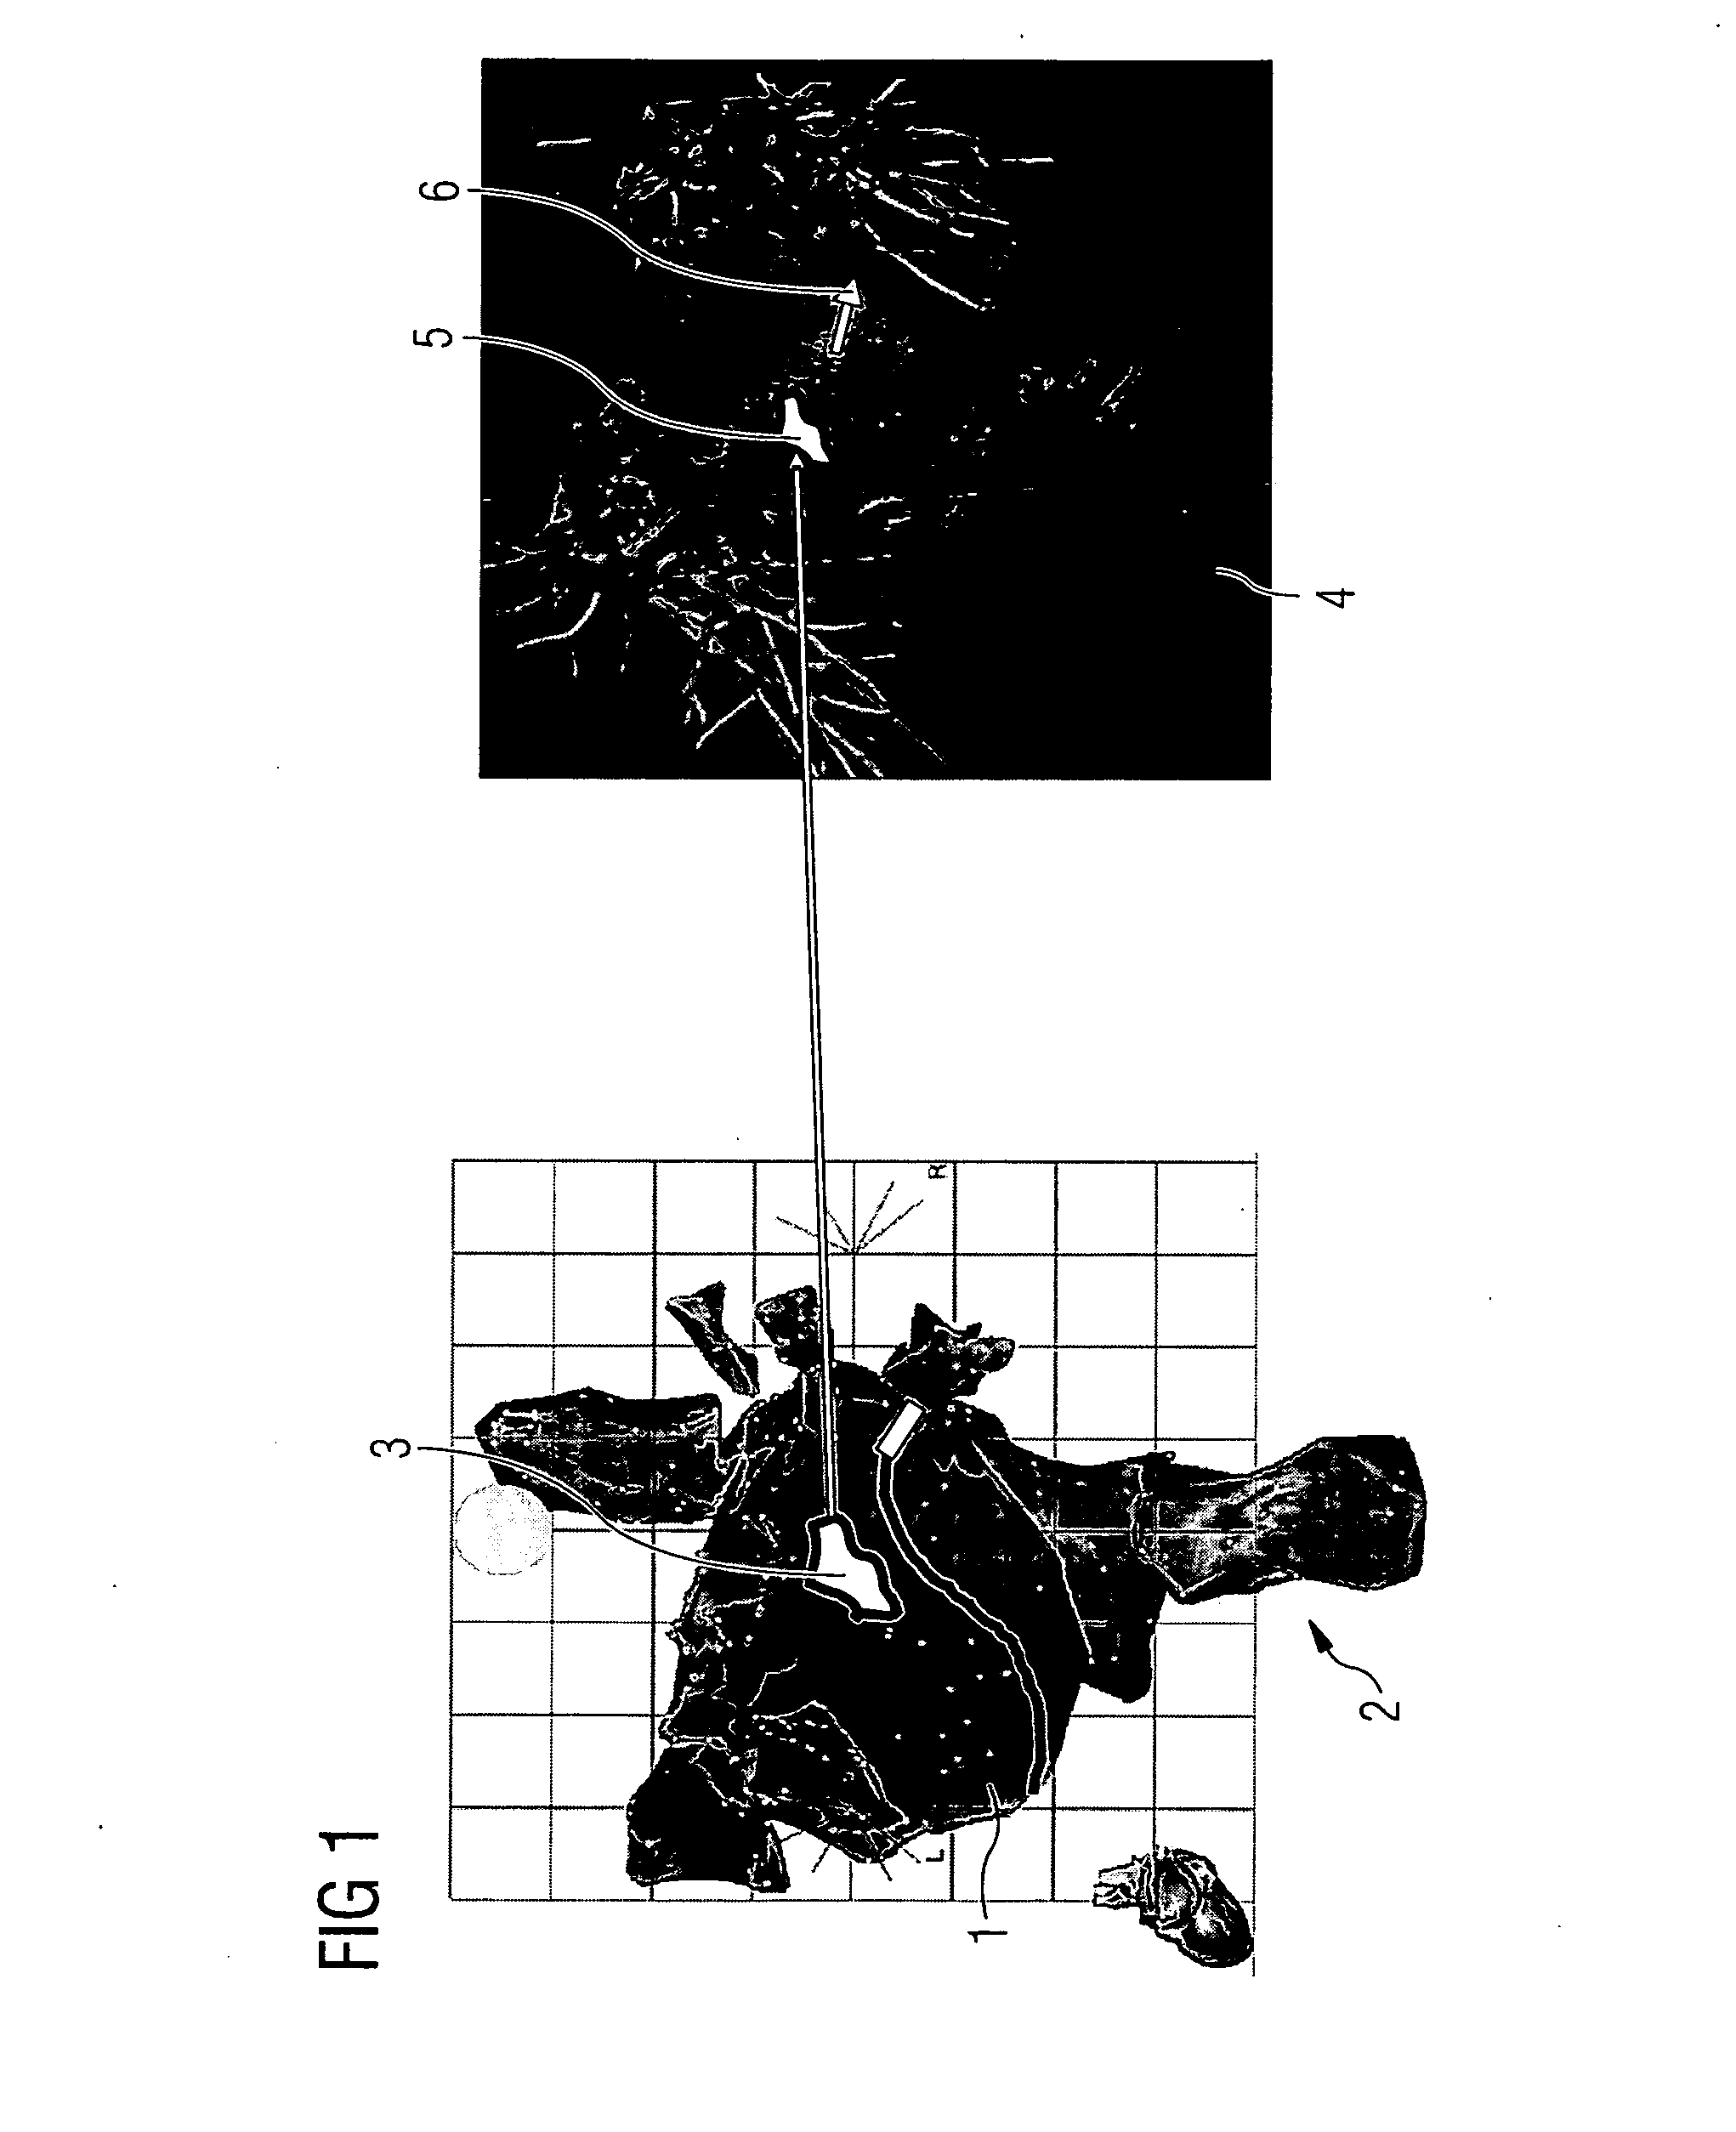 Method and apparatus for visually supporting an electrophysiological catheter application in the heart by means of bidirectional information transfer